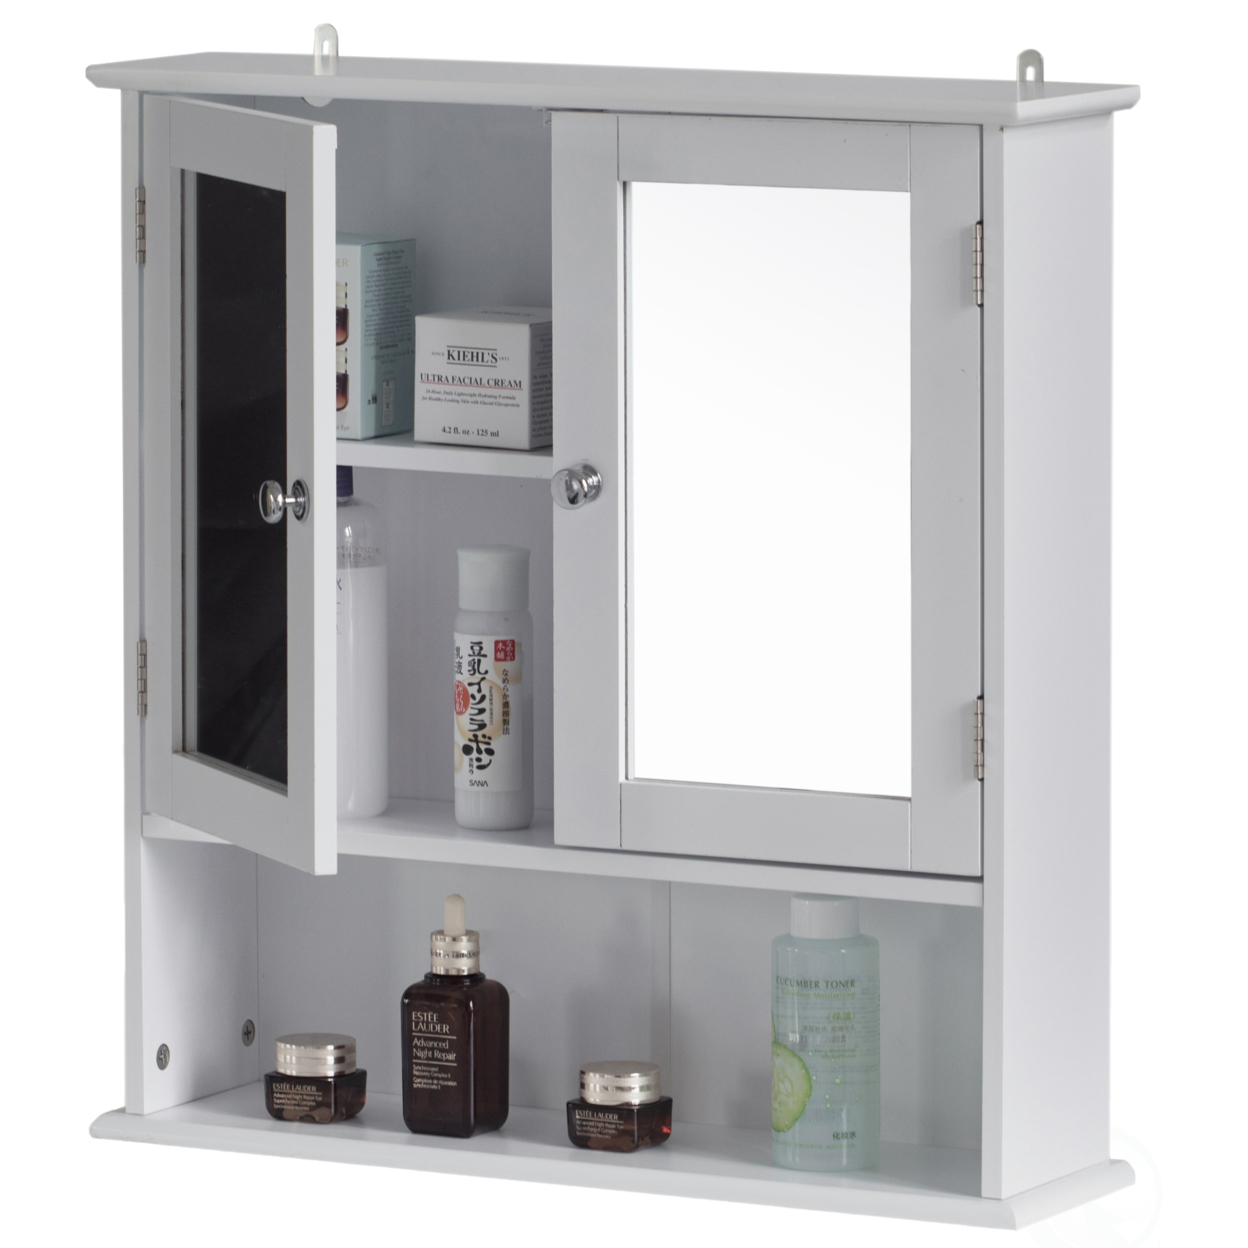 Mirror Wall Mounted Cabinet For the Bathroom and Vanity with Adjustable Shelves - white